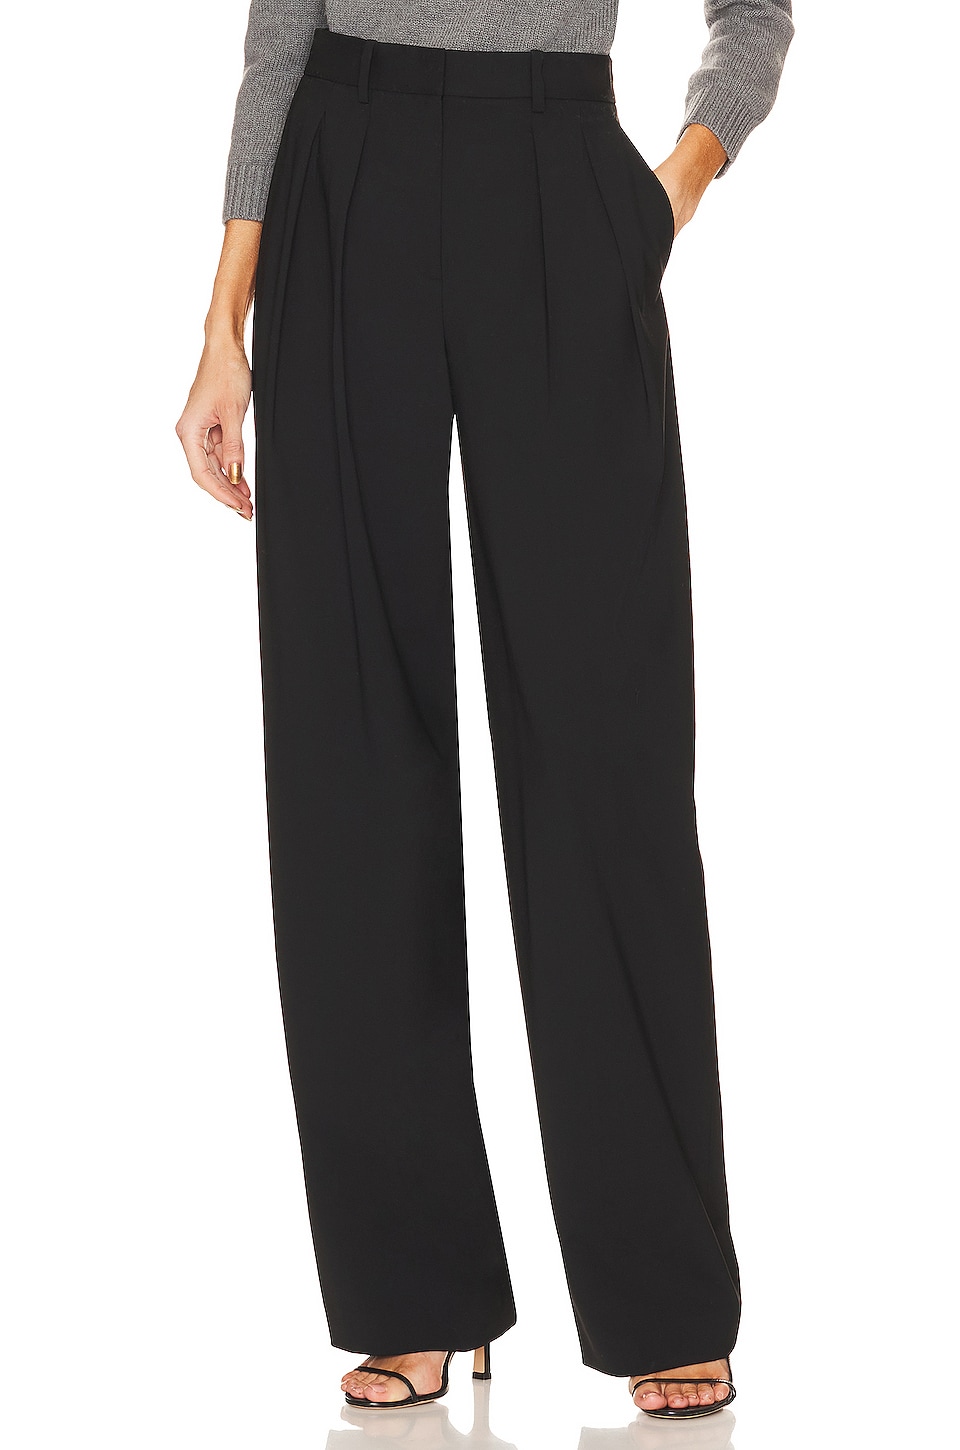 Theory Double Pleat Pant in Black